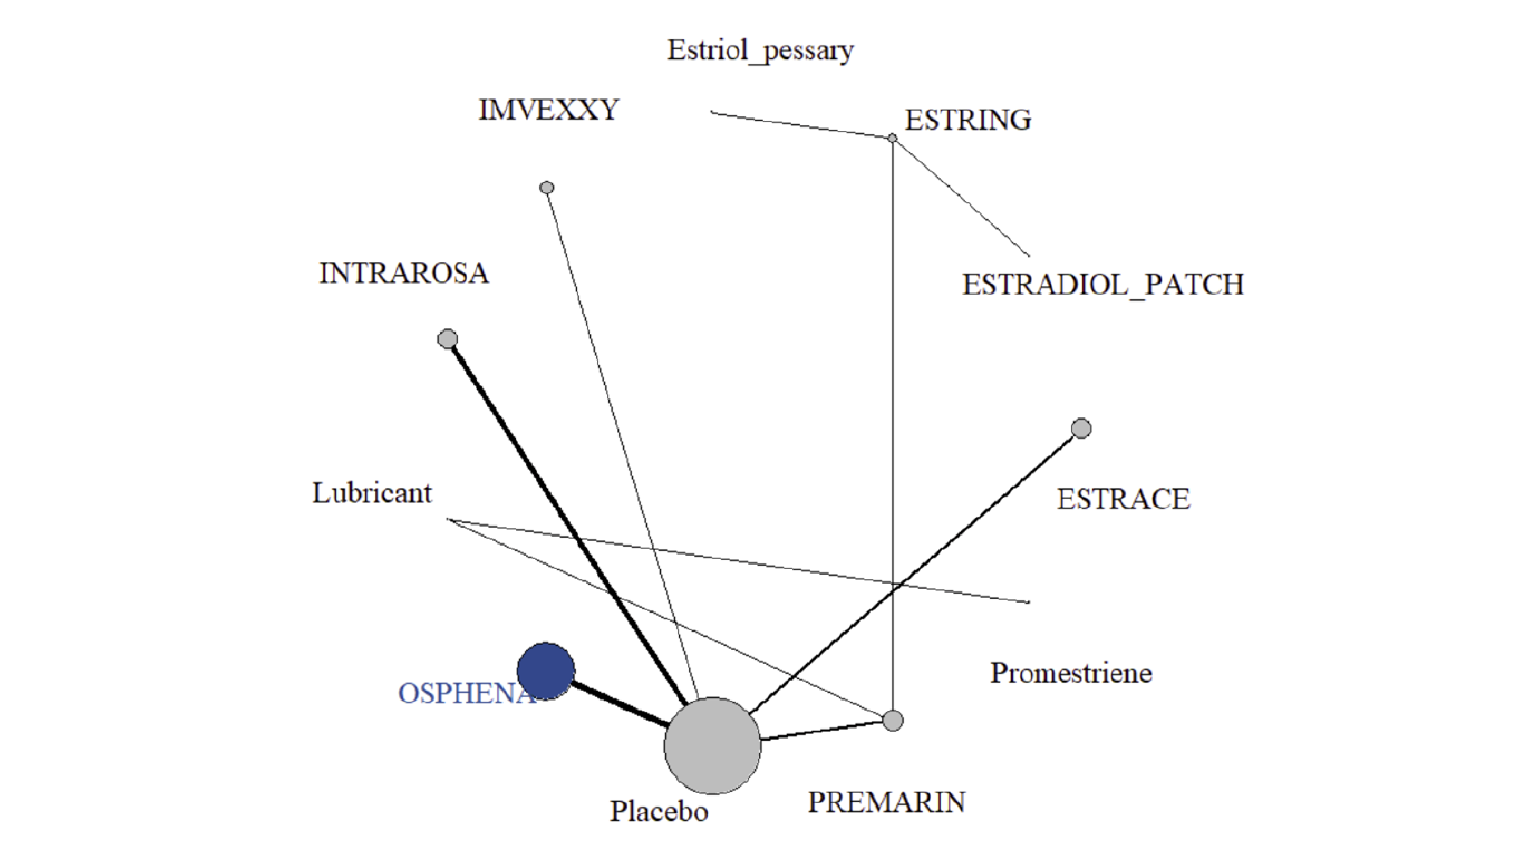 The evidence network for the reduction in vaginal pH at 12 weeks is shown for the sponsor-submitted indirect treatment comparison. In the network, Osphena, Intrarosa, Imvexxy, Estrace, and Premarin are connected to each other indirectly through the placebo node. In addition, lubricant is connected directly to Premarin and promestriene, and Estring is connected directly to Premarin, estriol pessary, and estradiol patch.